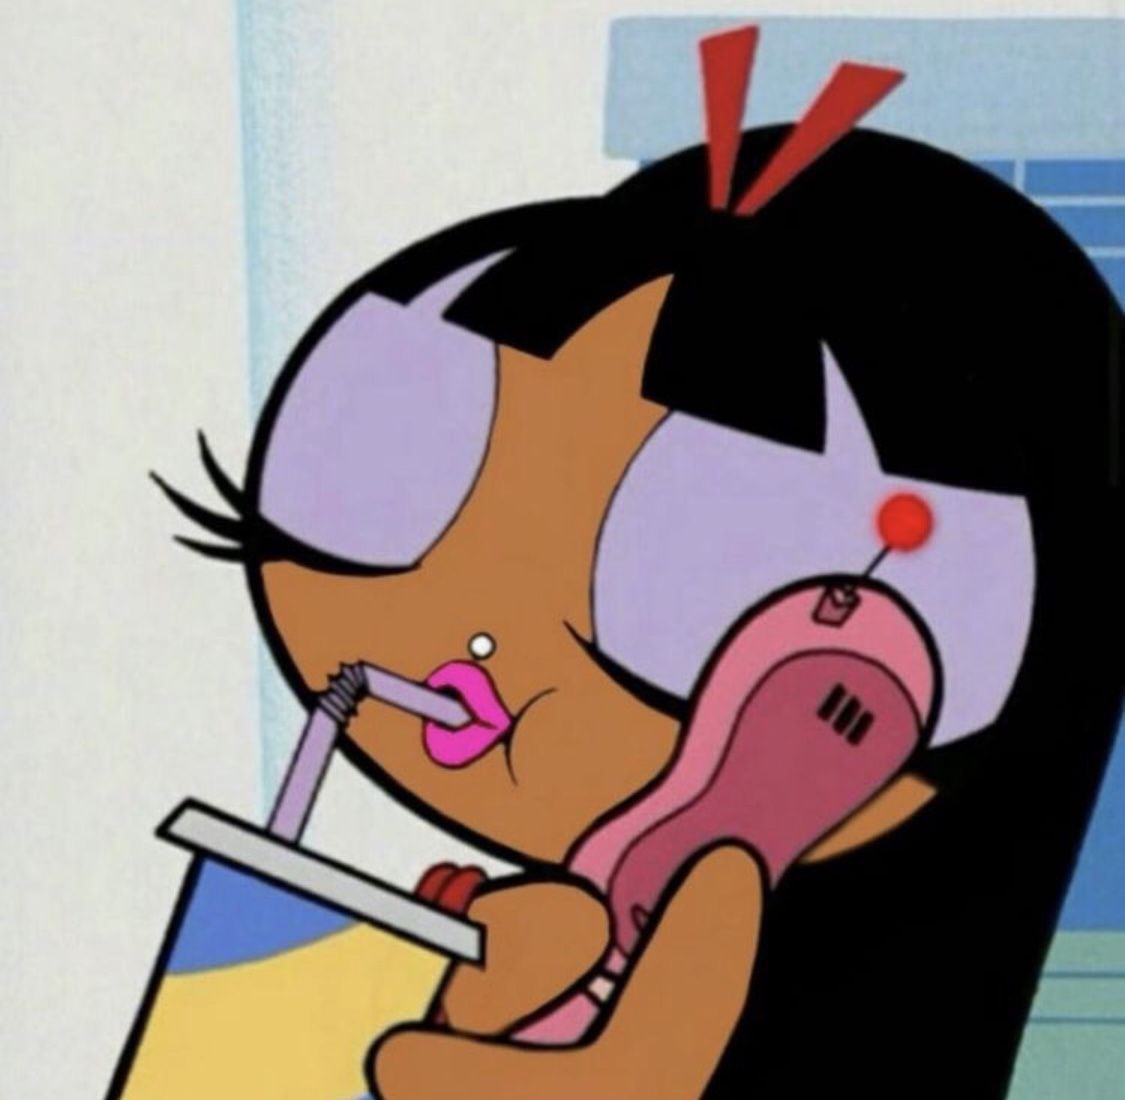 Power puff aesthetic. Cartoon profile picture, Black girl